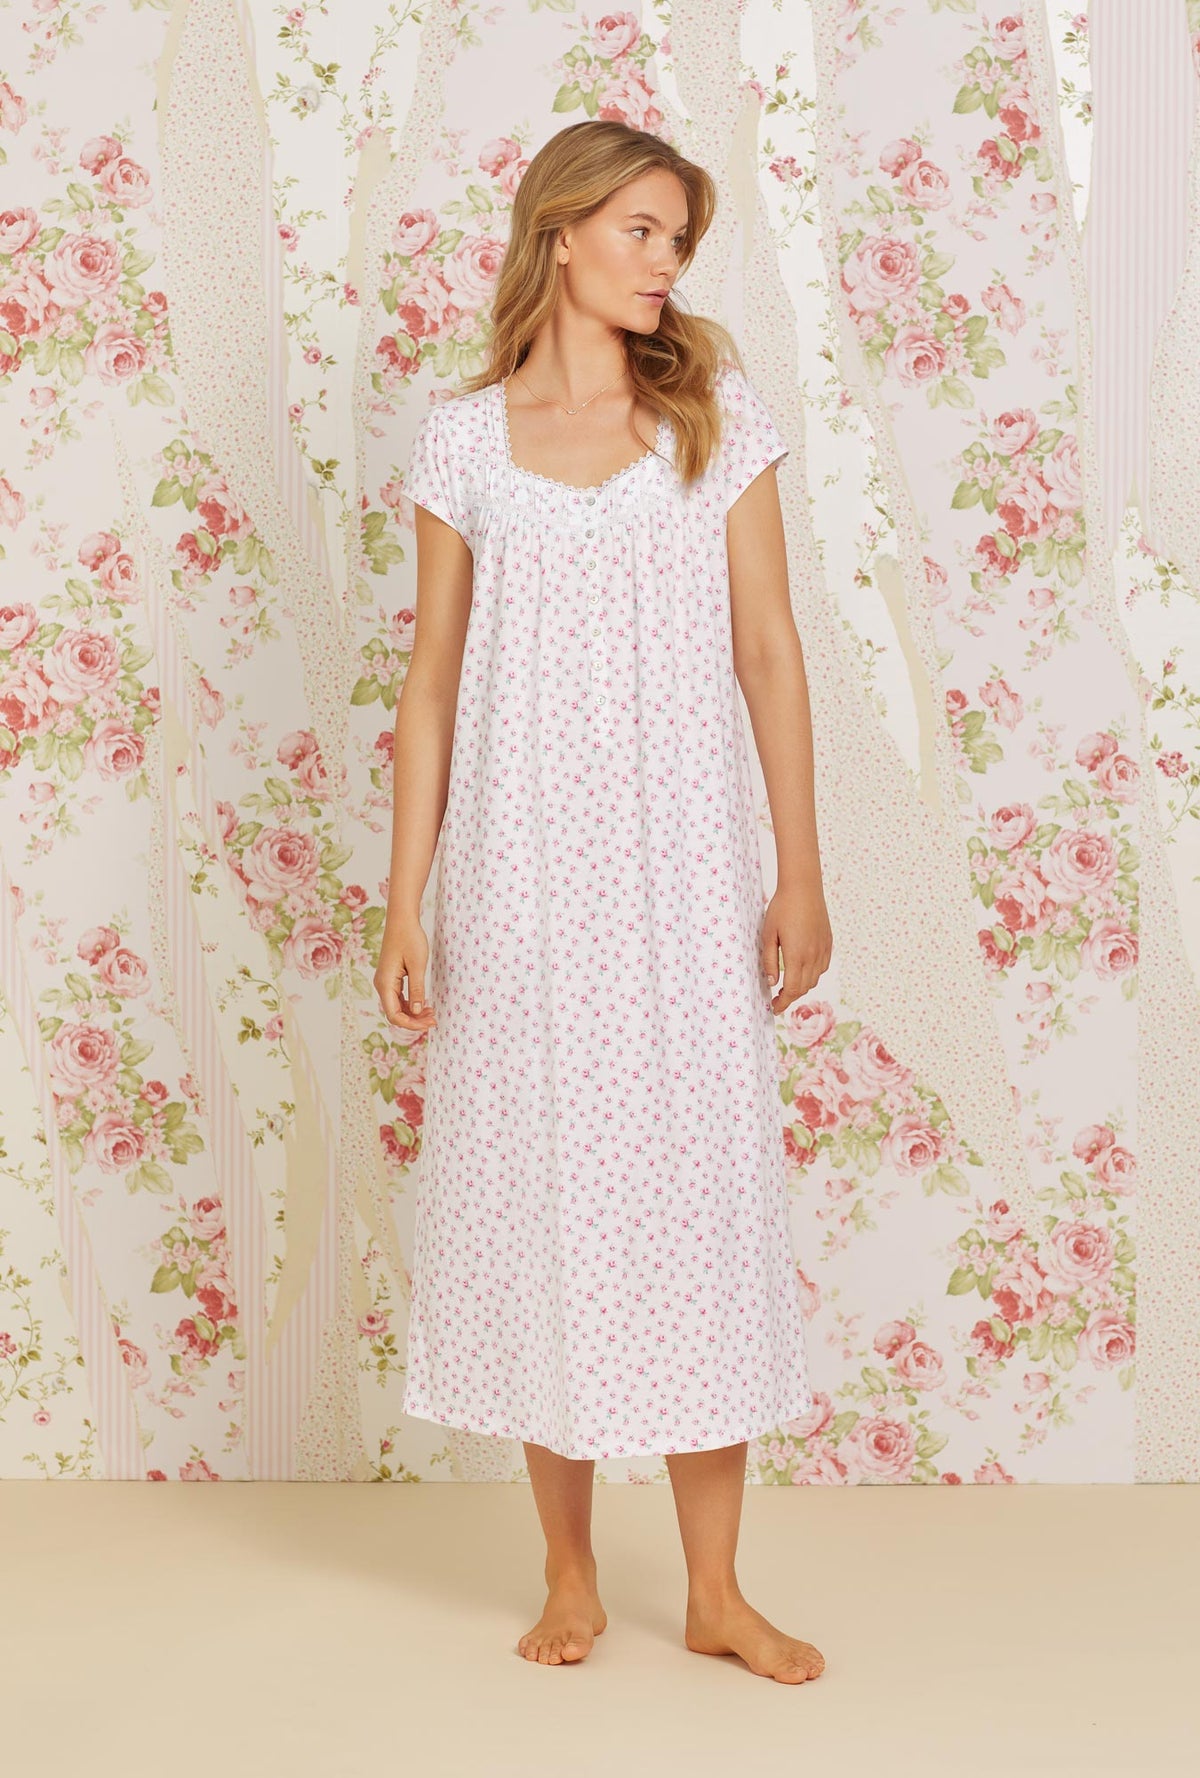 A lady wearing pink cap sleeve cotton knit nightgown with joyful rose print.